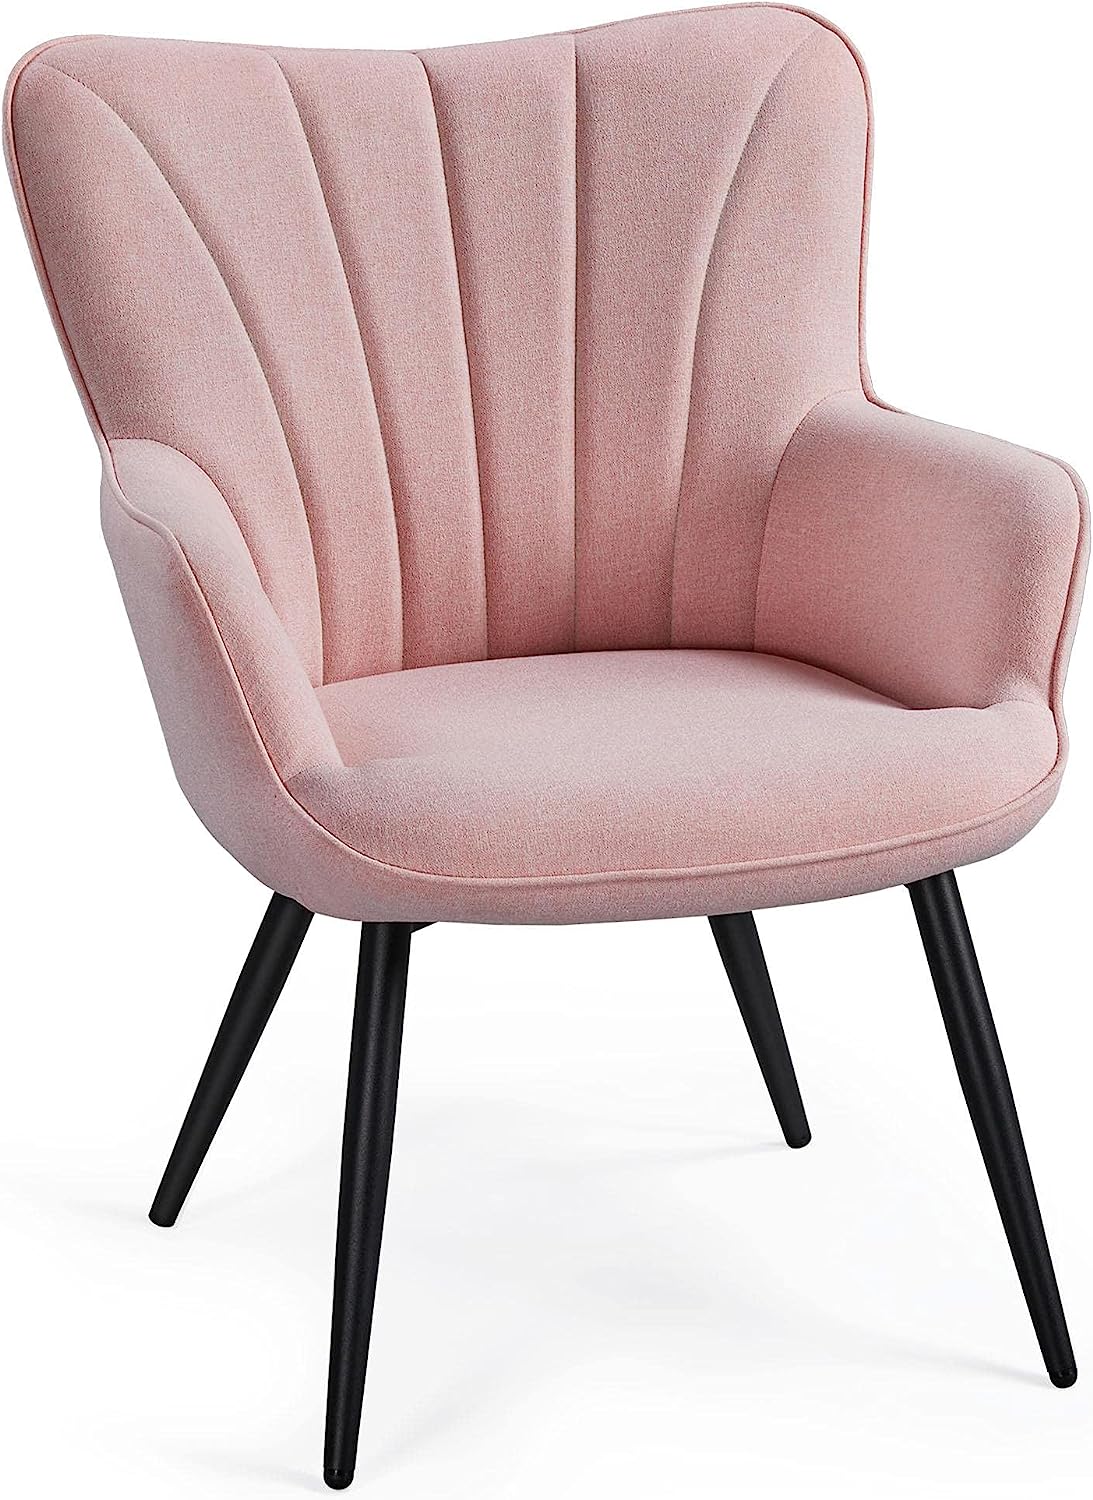 Yaheetech Accent Chair, Modern and Elegant Armchair, [...]